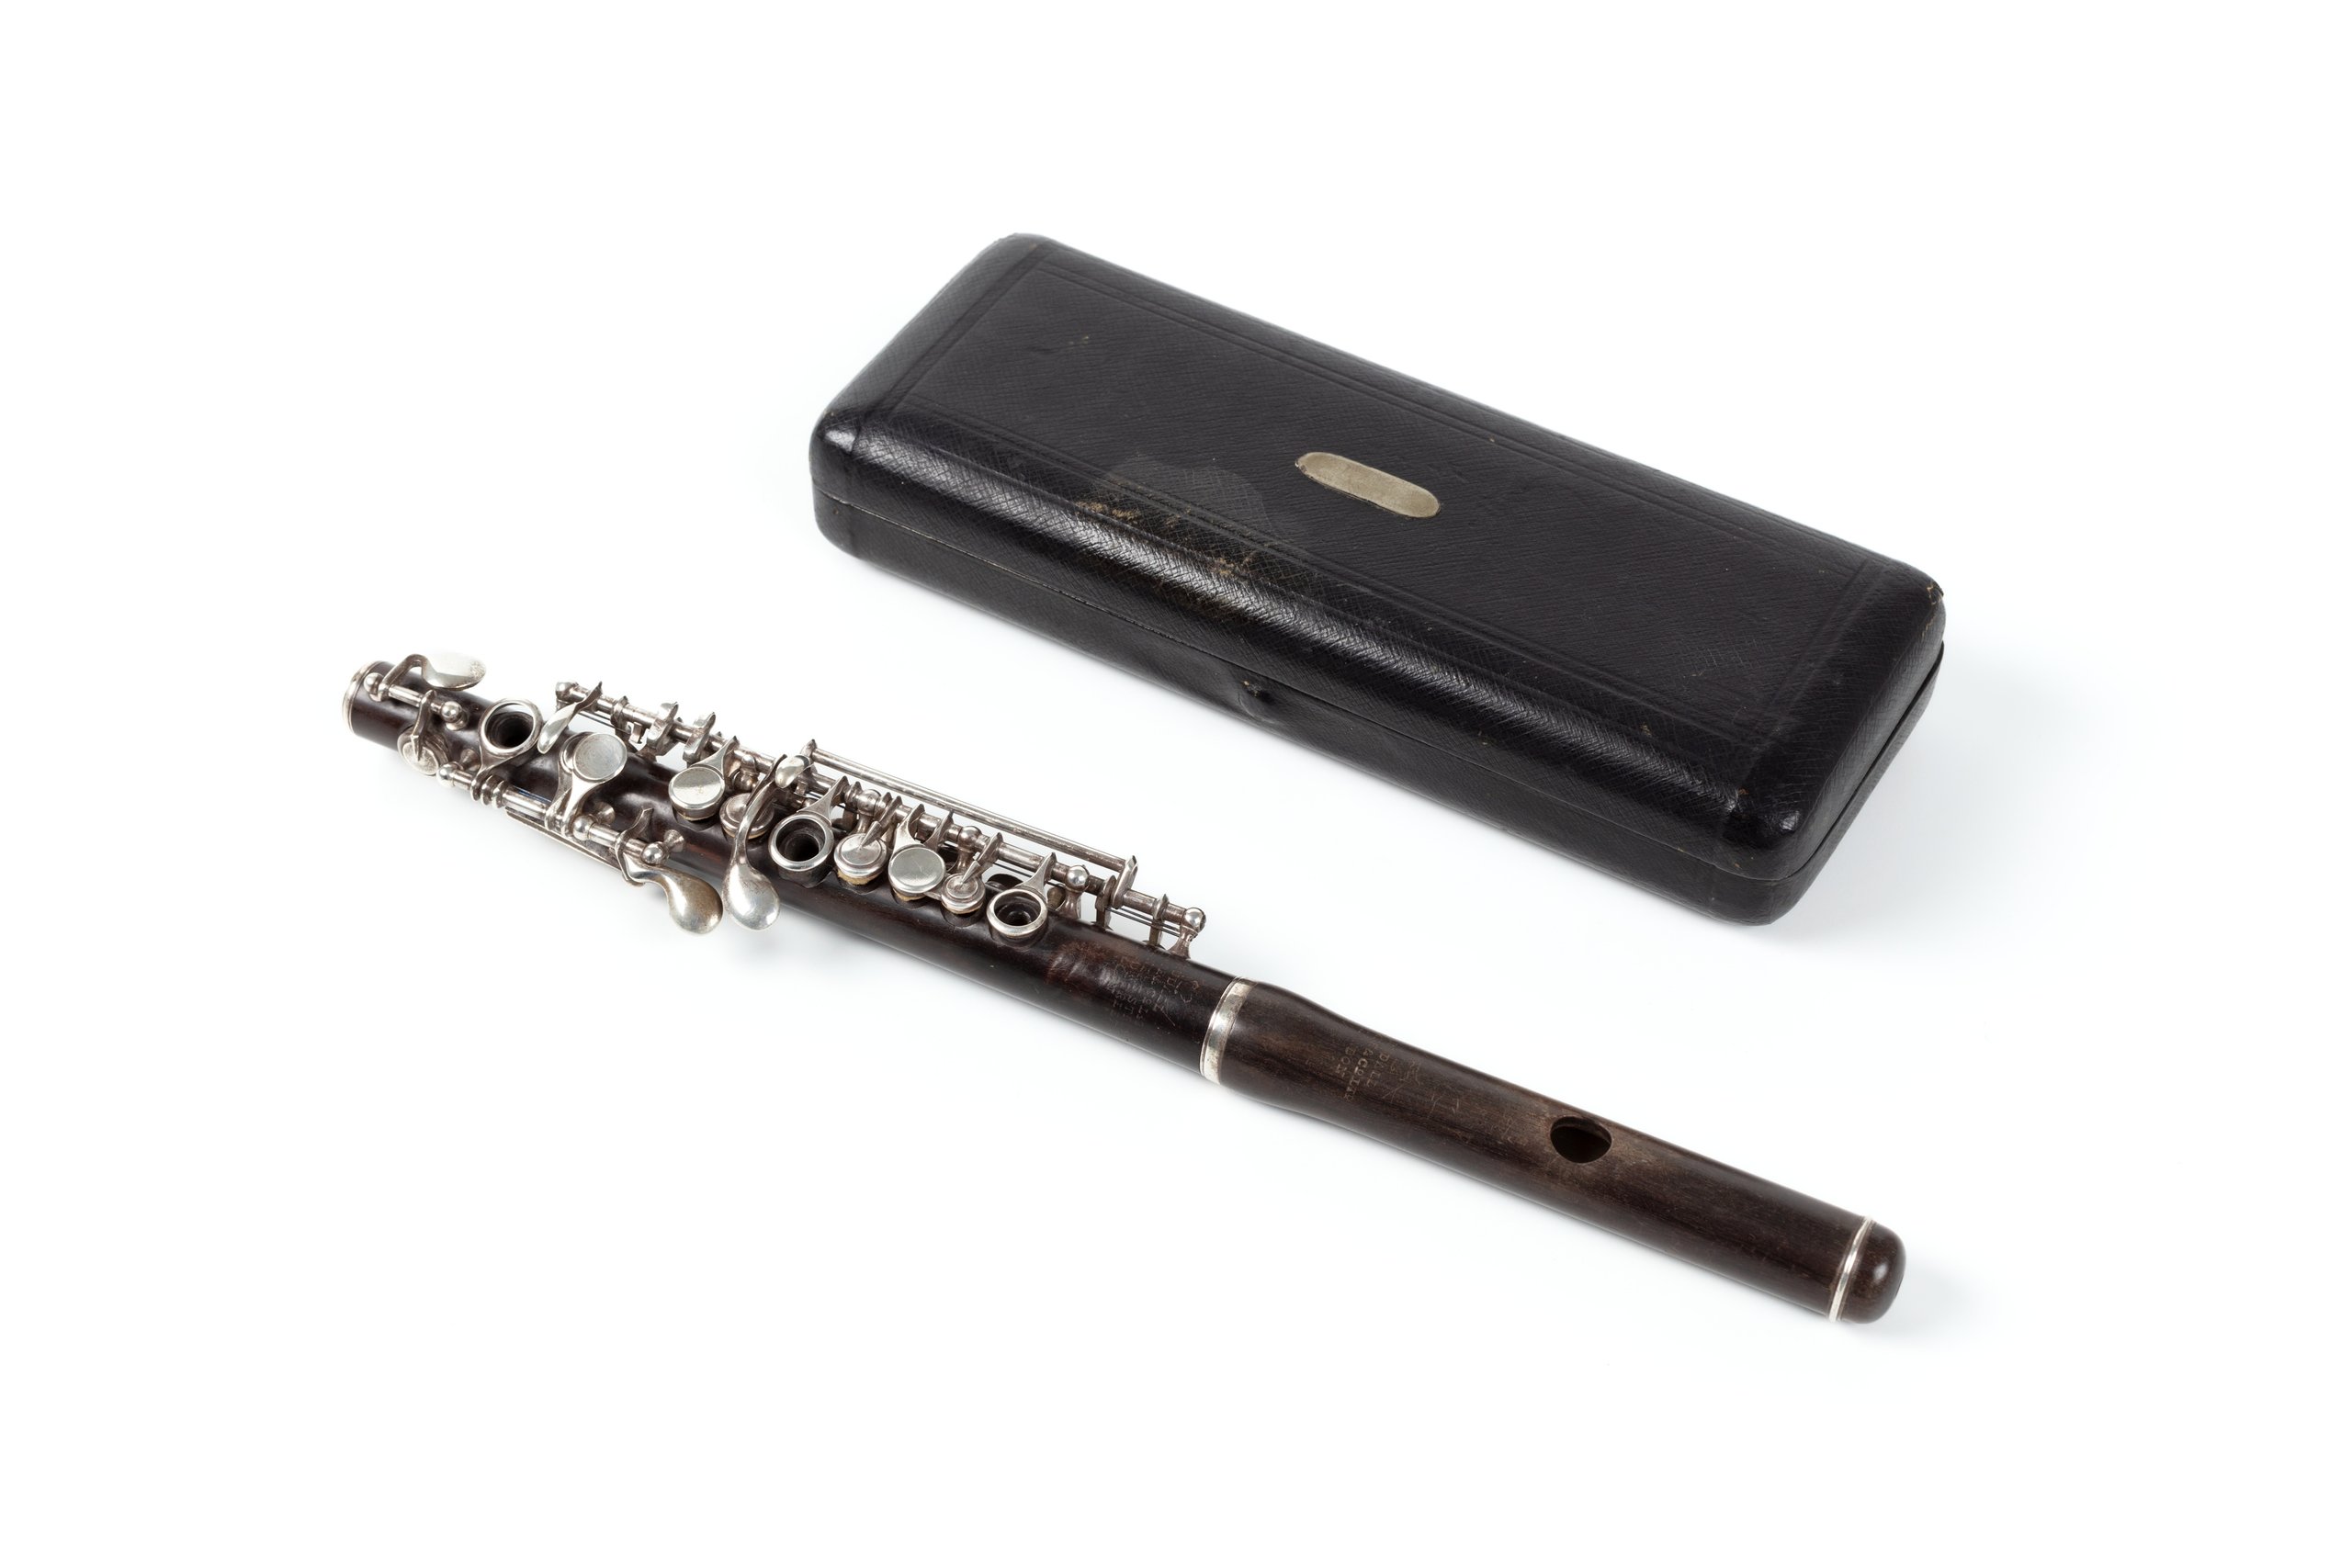 Radcliff system piccolo used by Richard Chugg